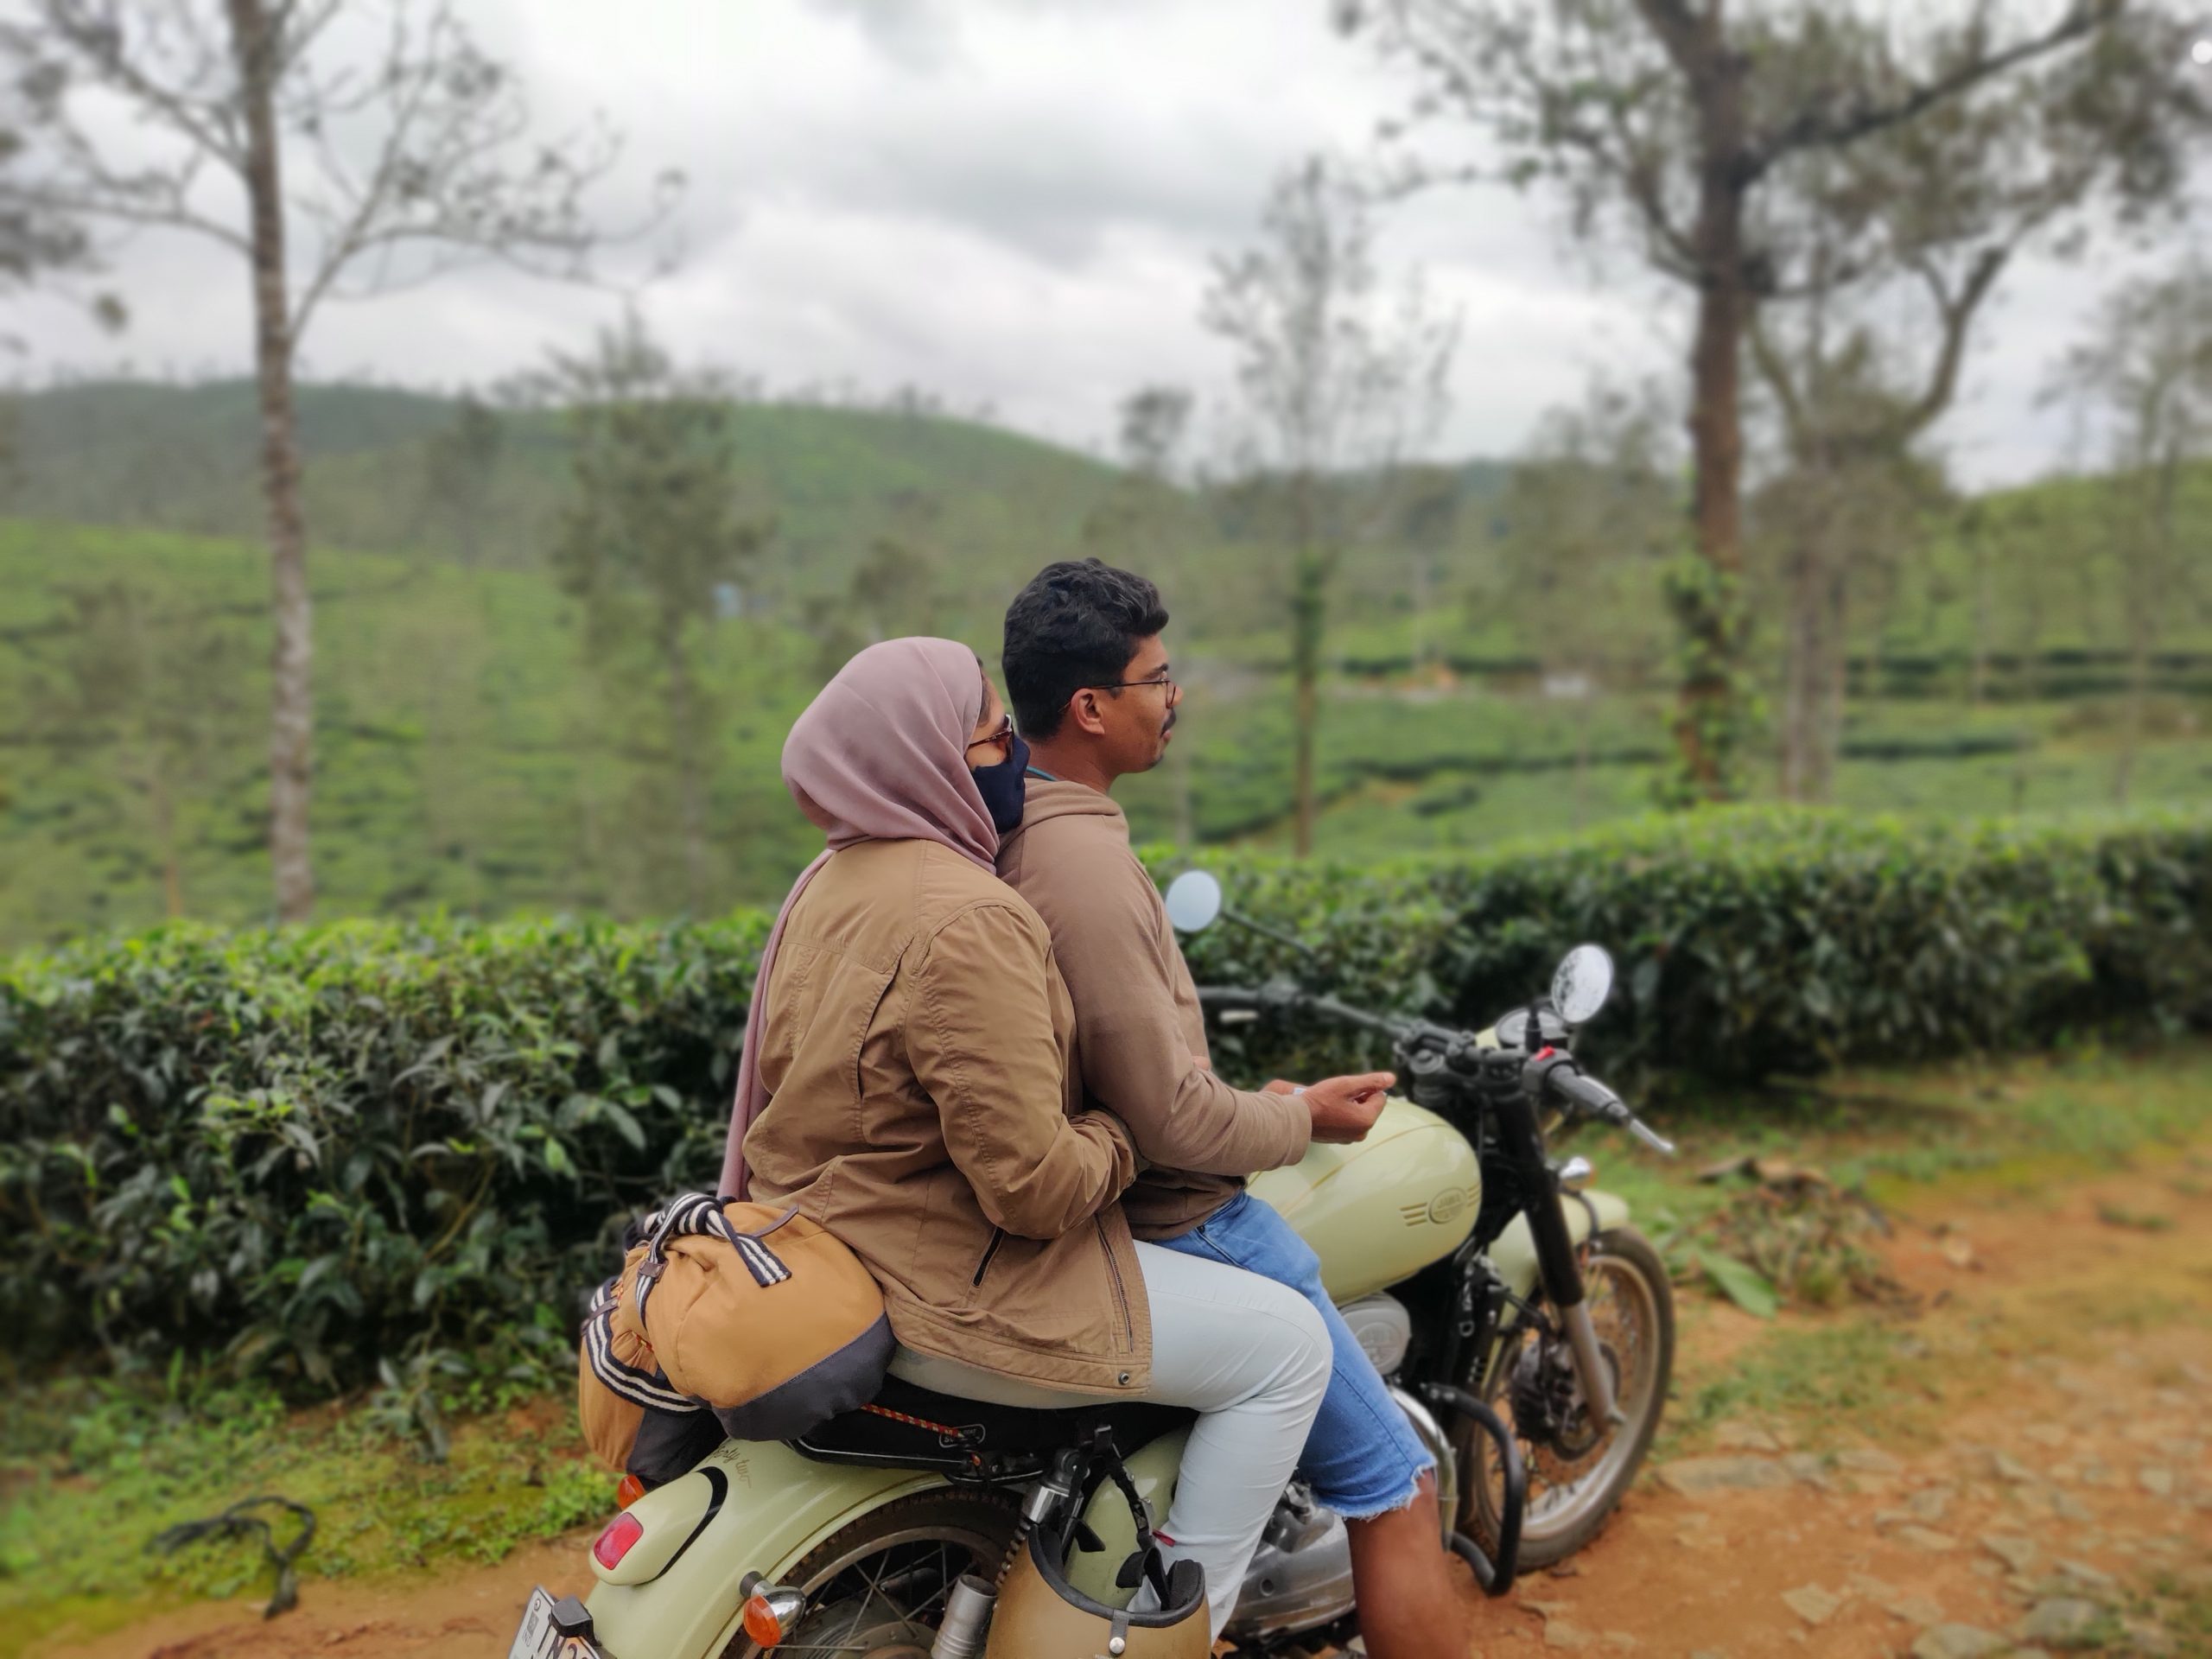 The best motorcycle ride destinations in Kerala